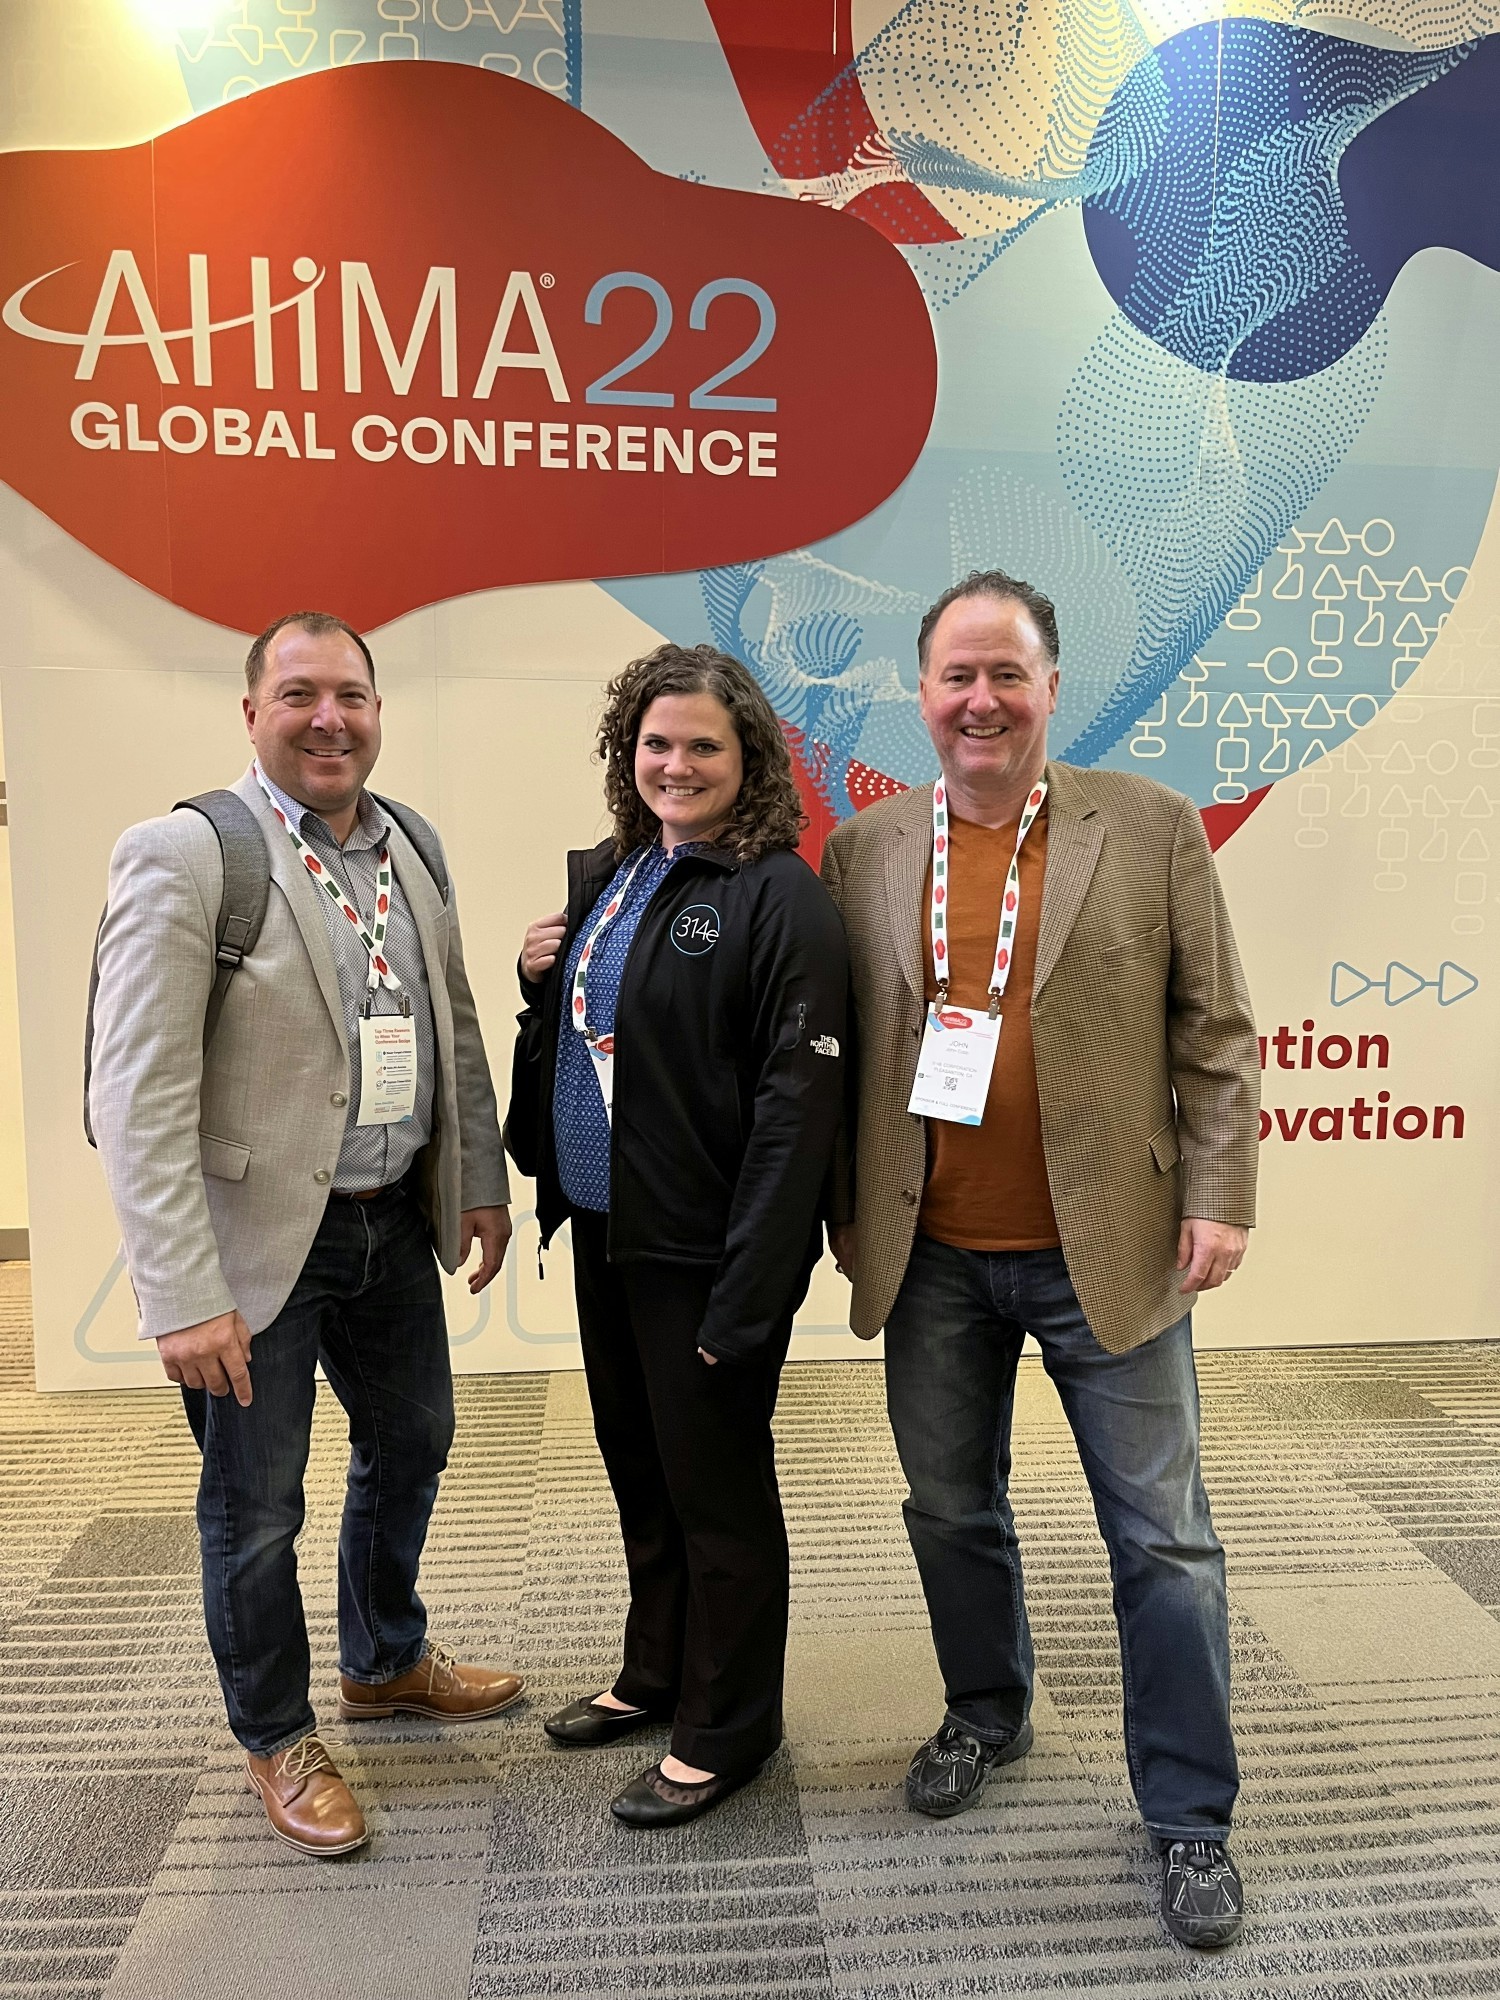 Our team at AHIMA 22